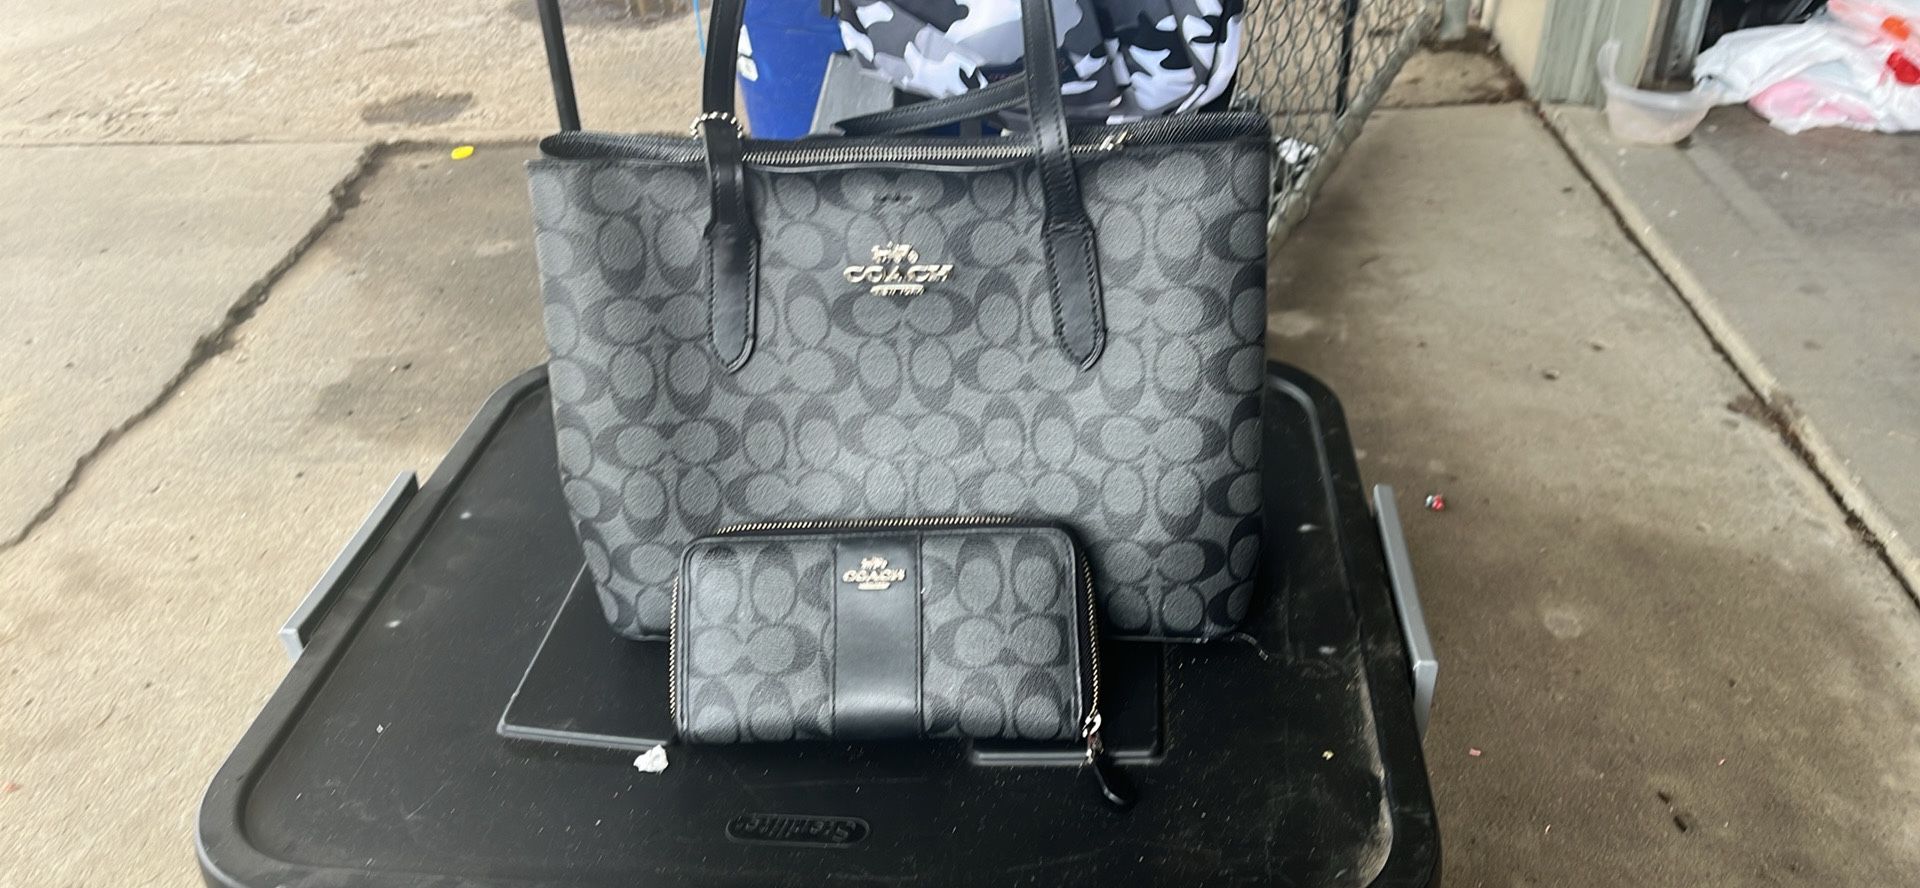 Coach Bag and Wallet 